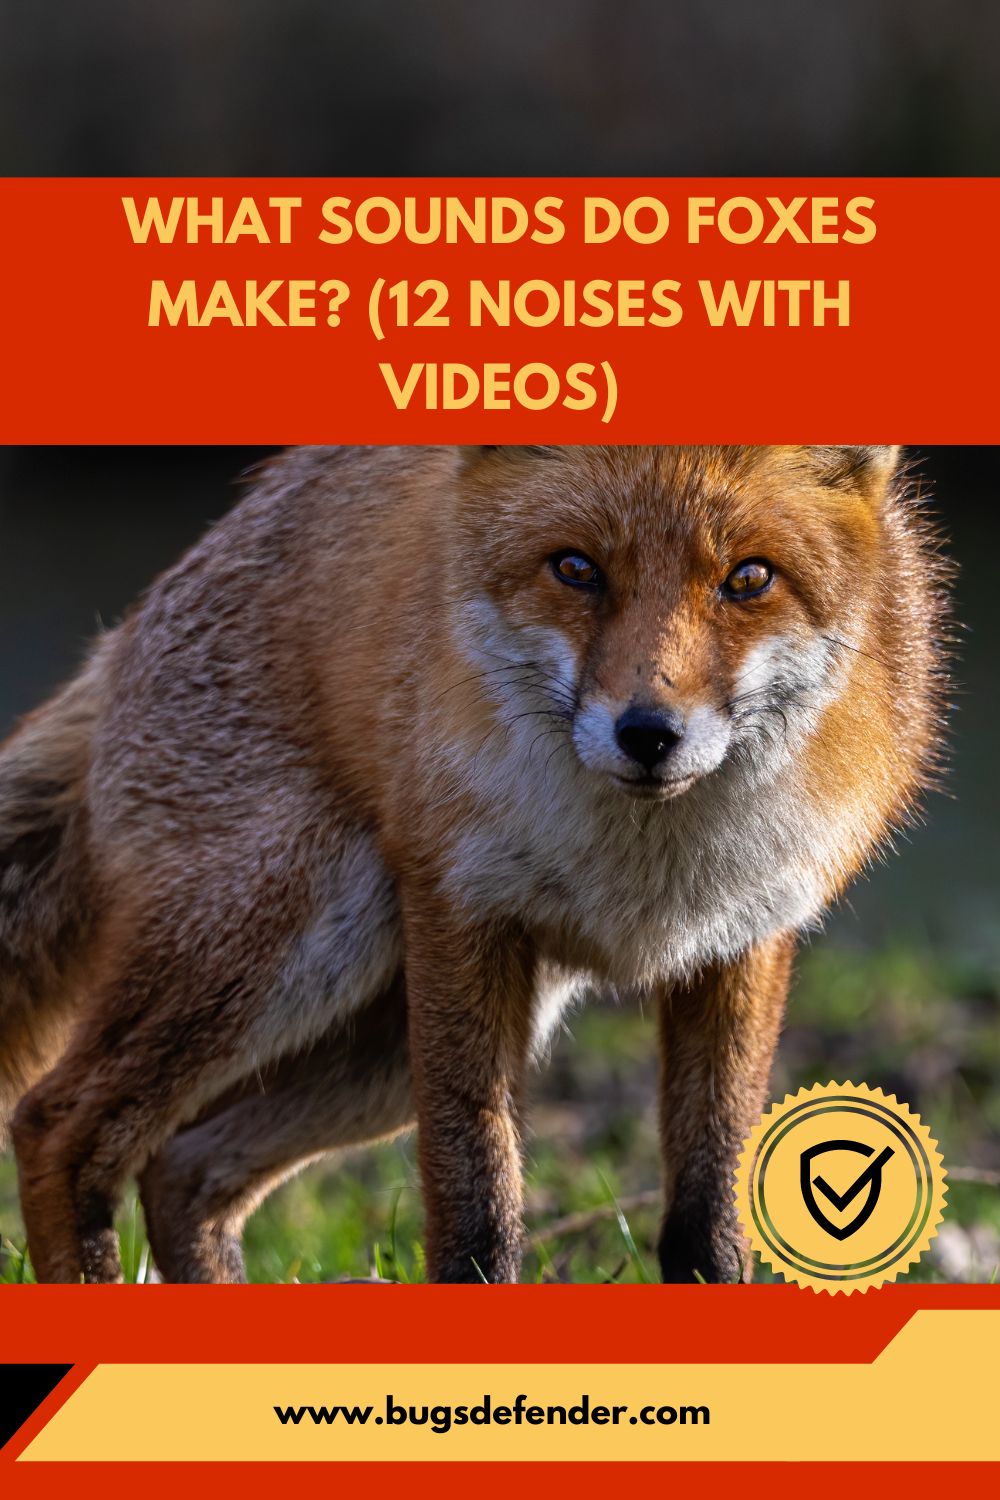 What Sounds Do Foxes Make? (12 Noises with Videos) pin1